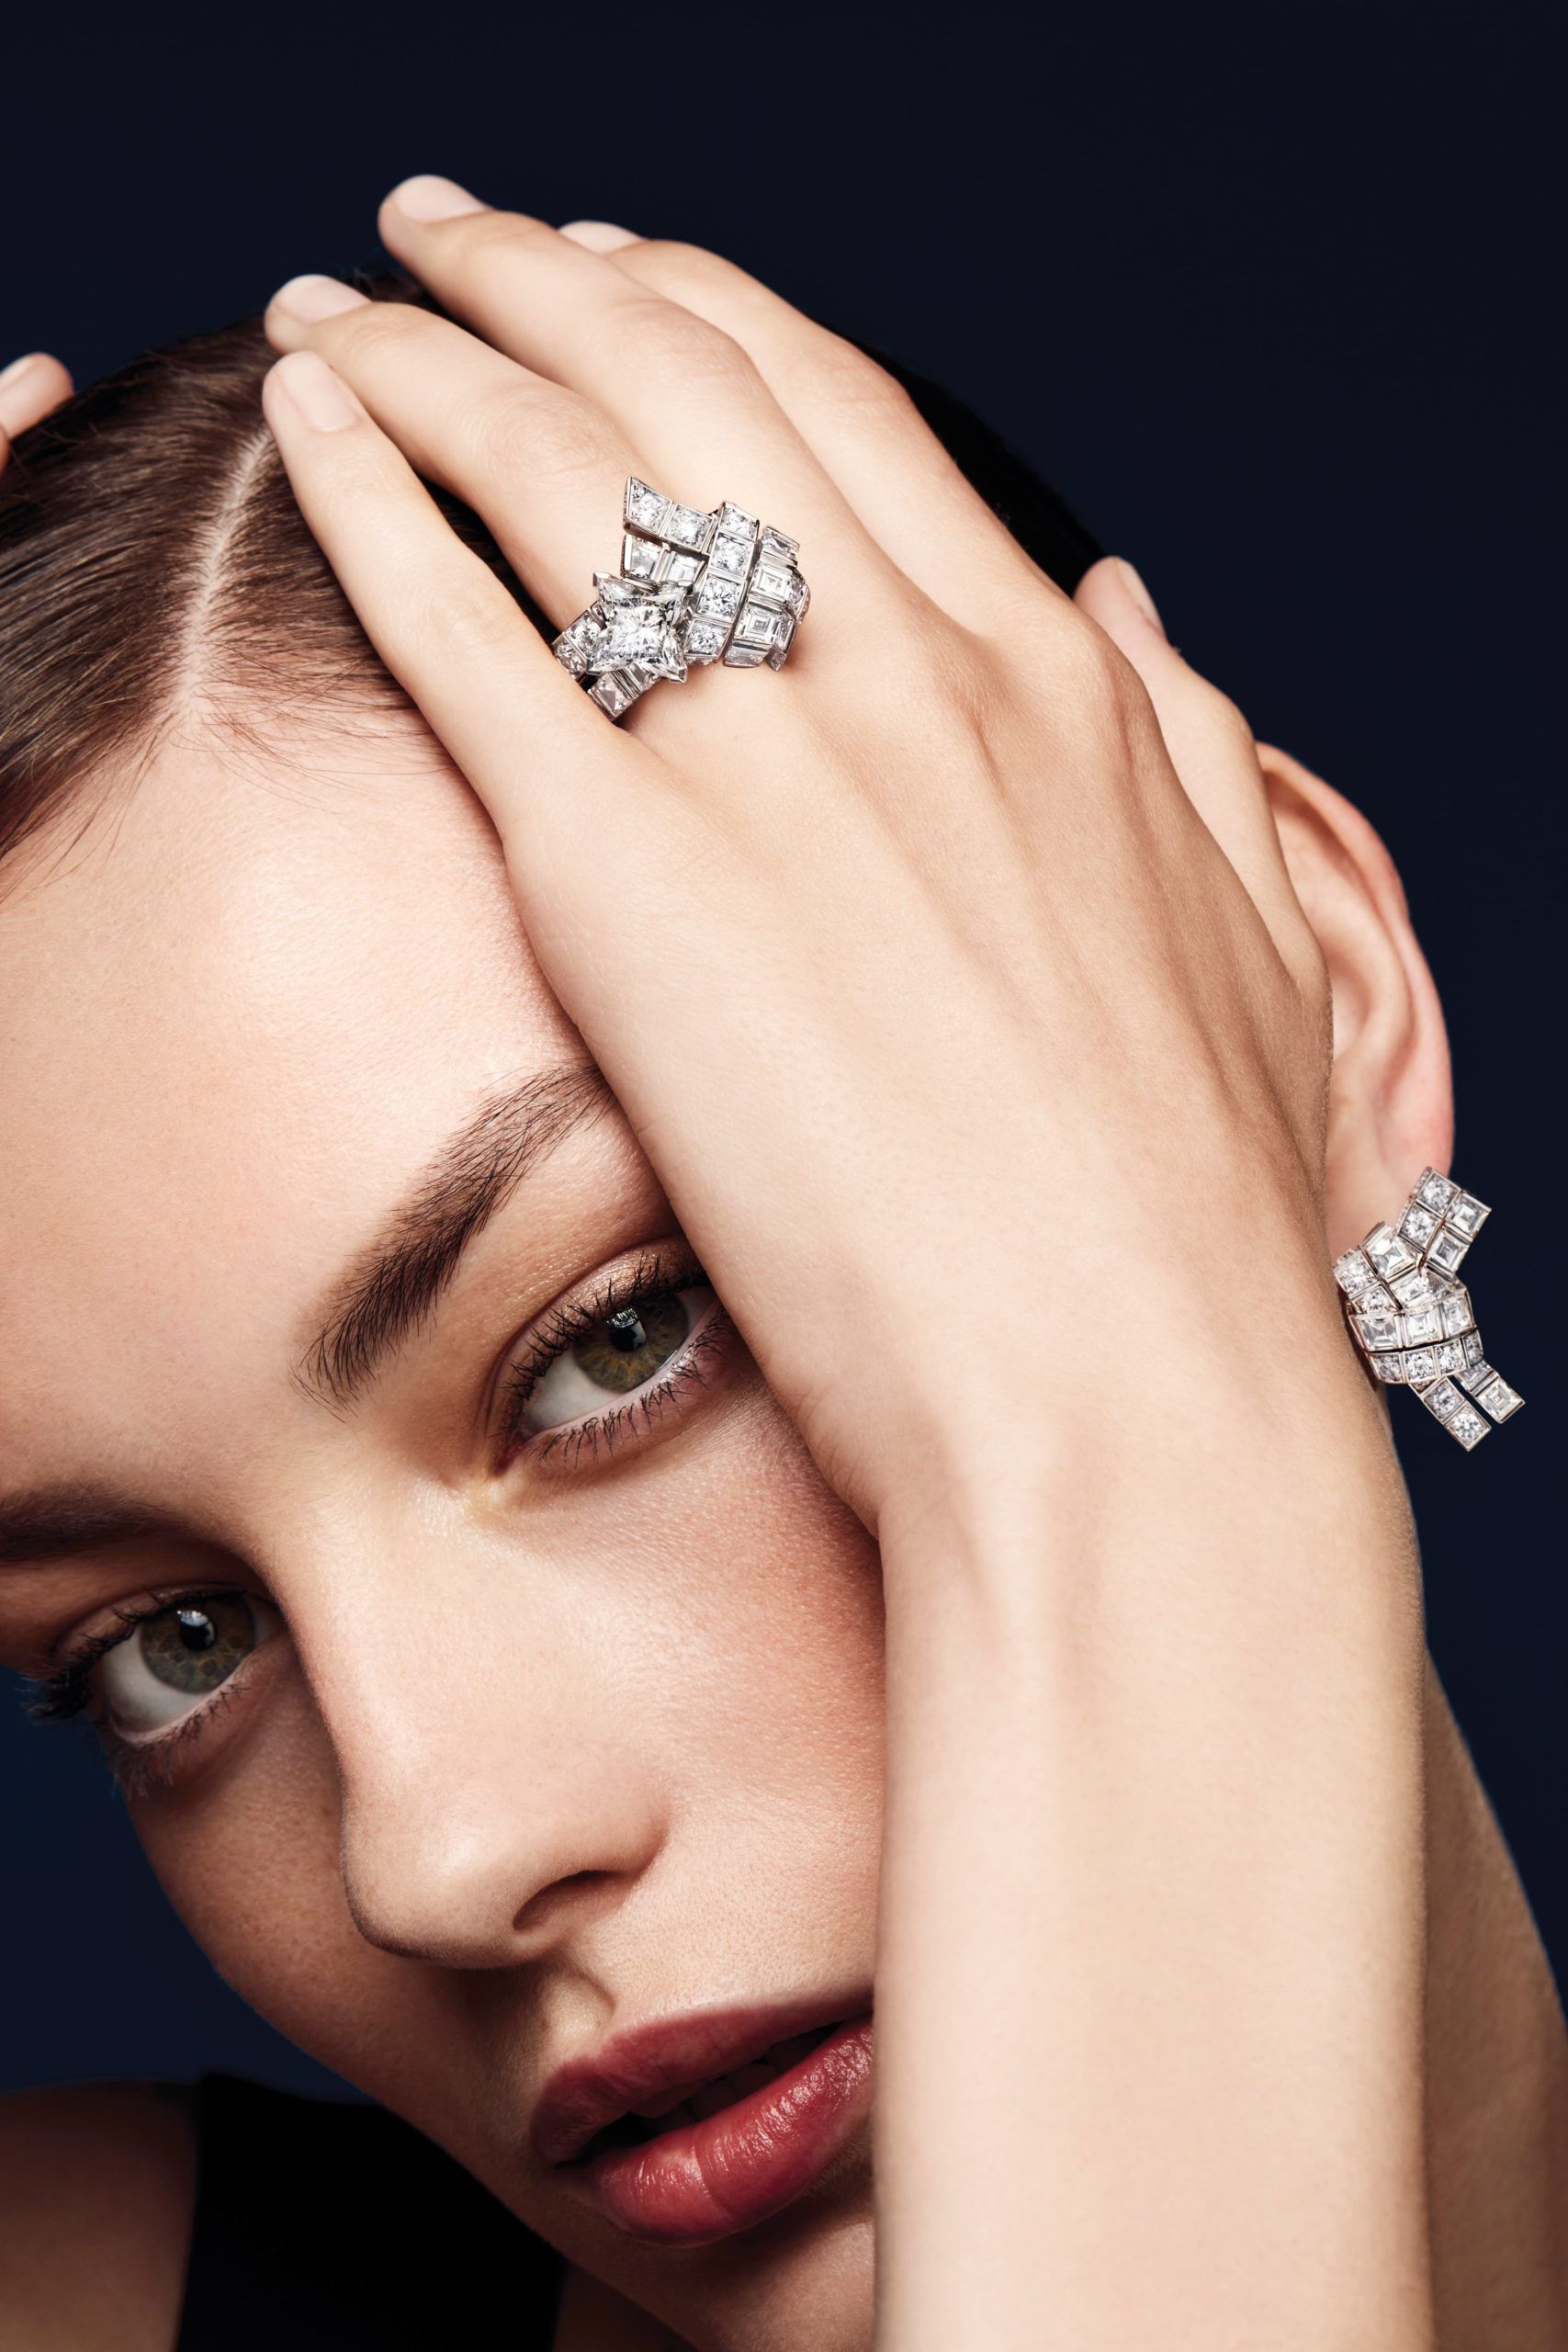 A Spark of Courage from Louis Vuitton's Bravery High Jewellery Collection